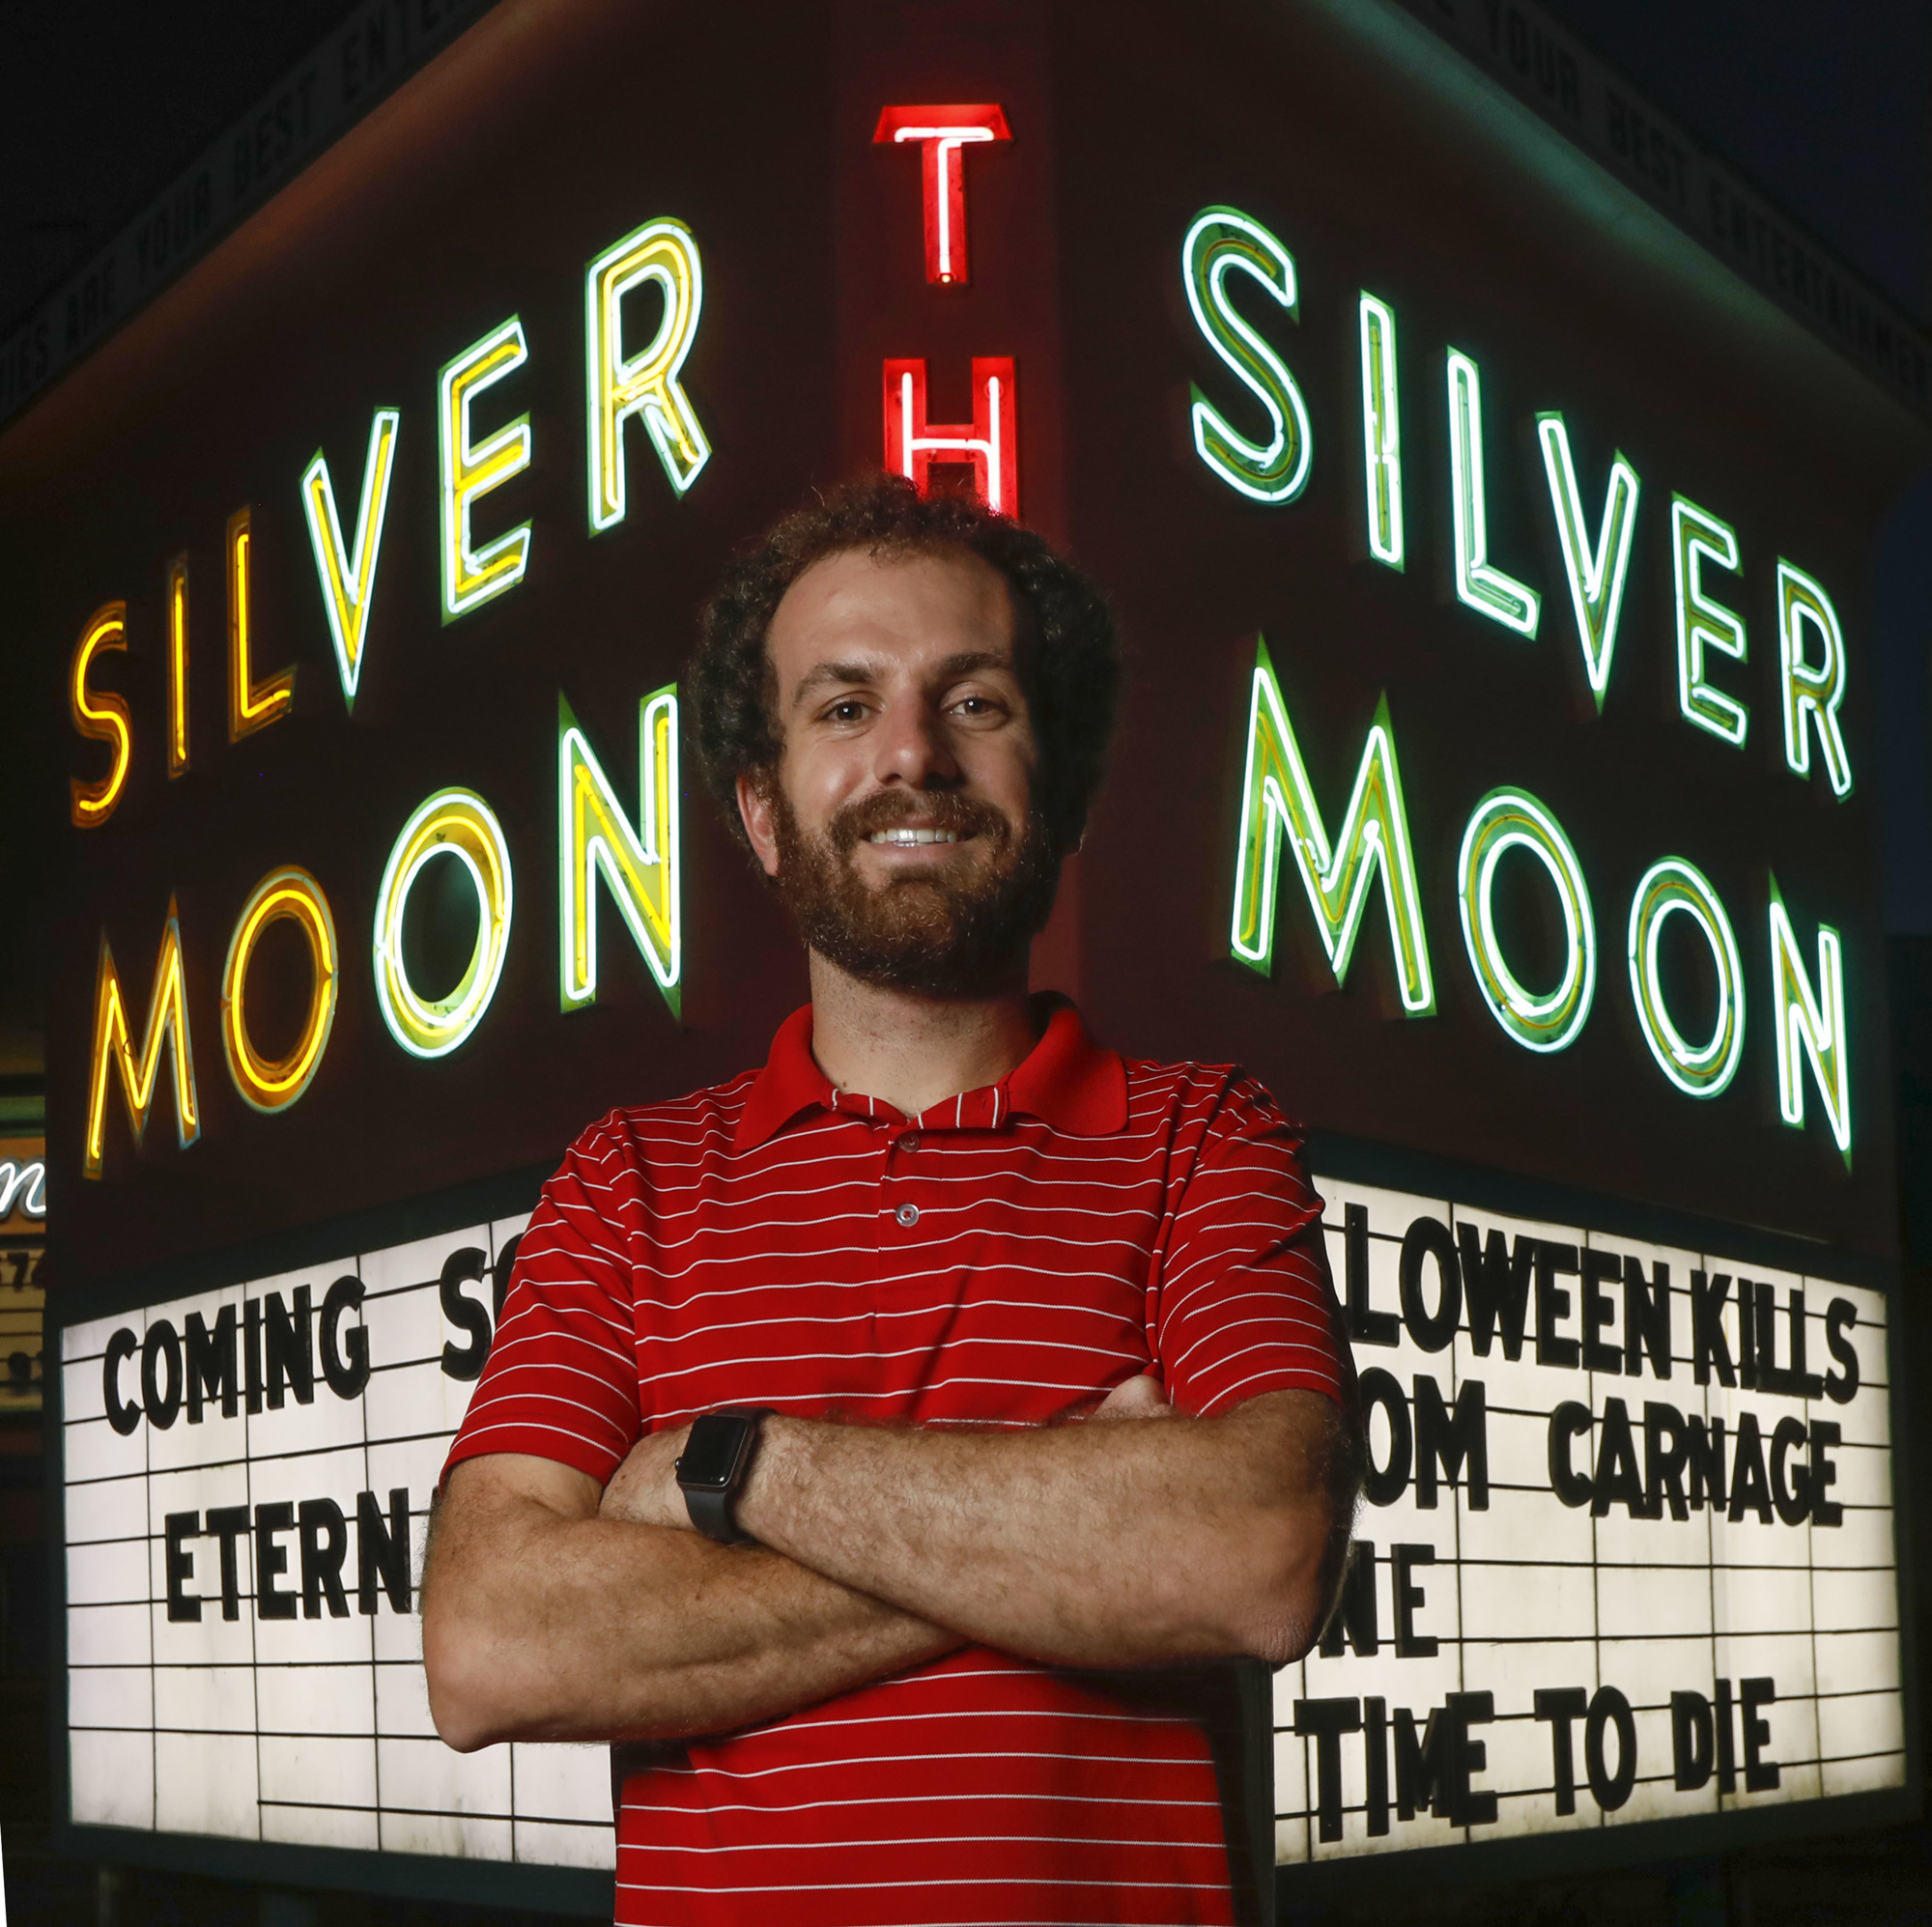 Calvin Knight. Chip Sawyer has overseen Lakeland’s Silver Moon Drive-In since 2017.